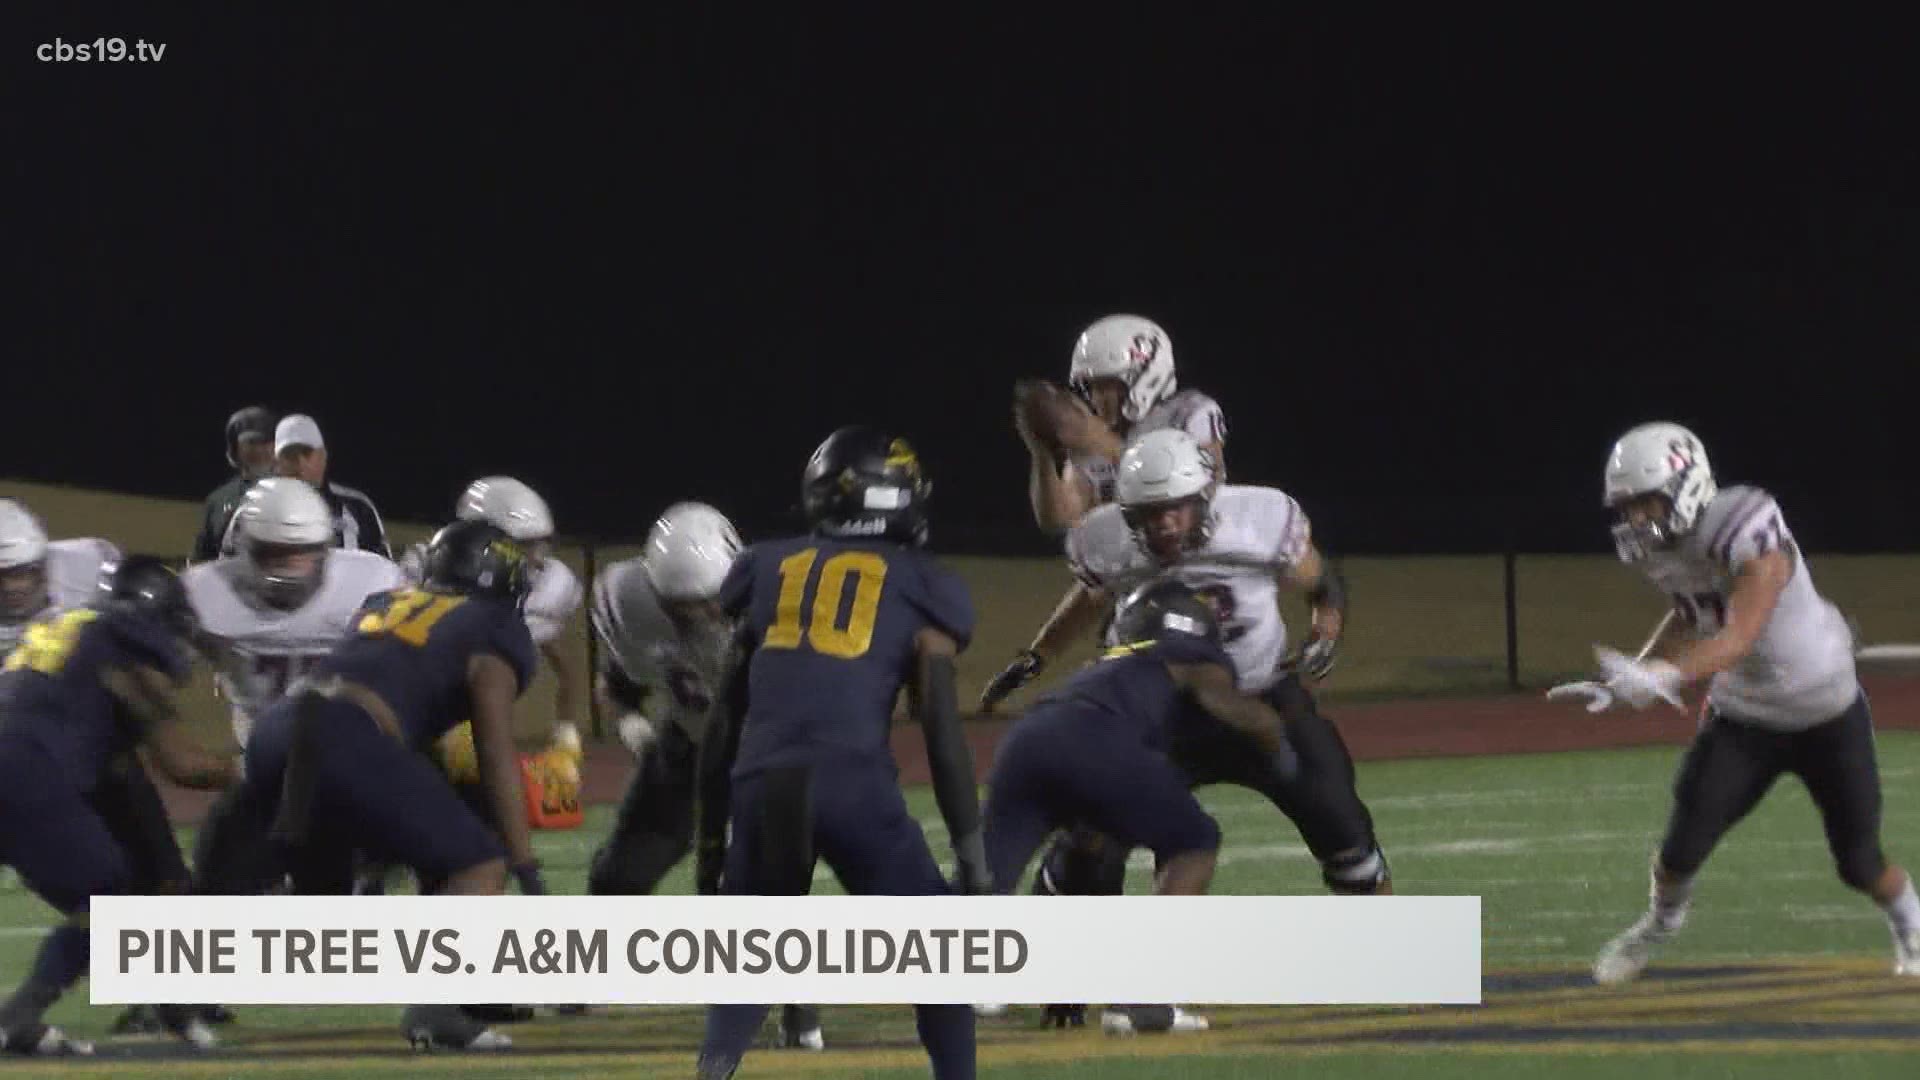 The A&M Consolidated Tigers took on the Pine Tree Pirates in Longview in the first round of the UIL High School Football Playoffs.